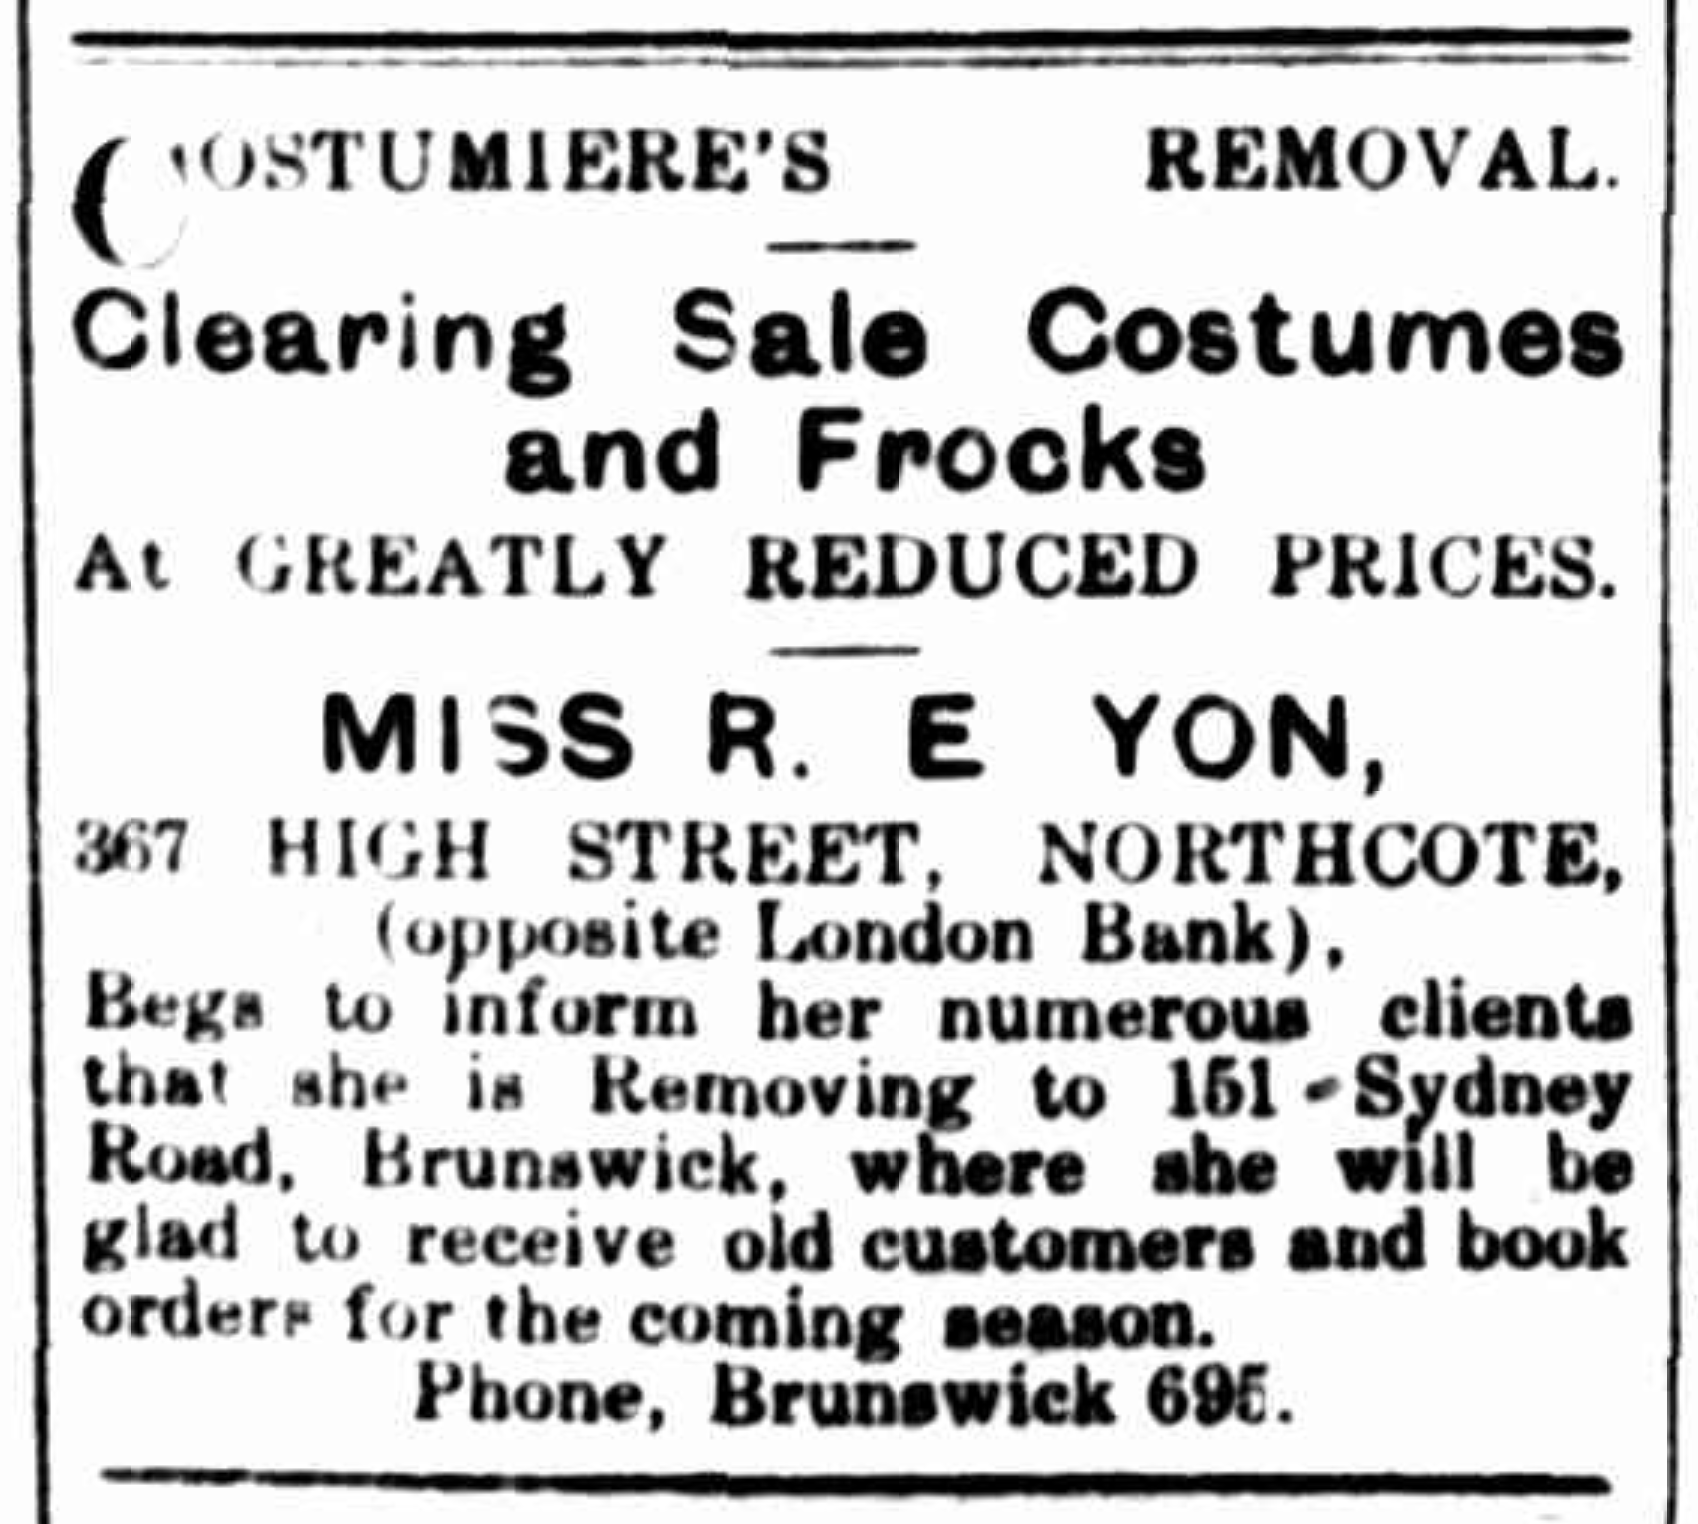 Newspaper advertisement advertising the relocation of Miss R. E. Yon's shop